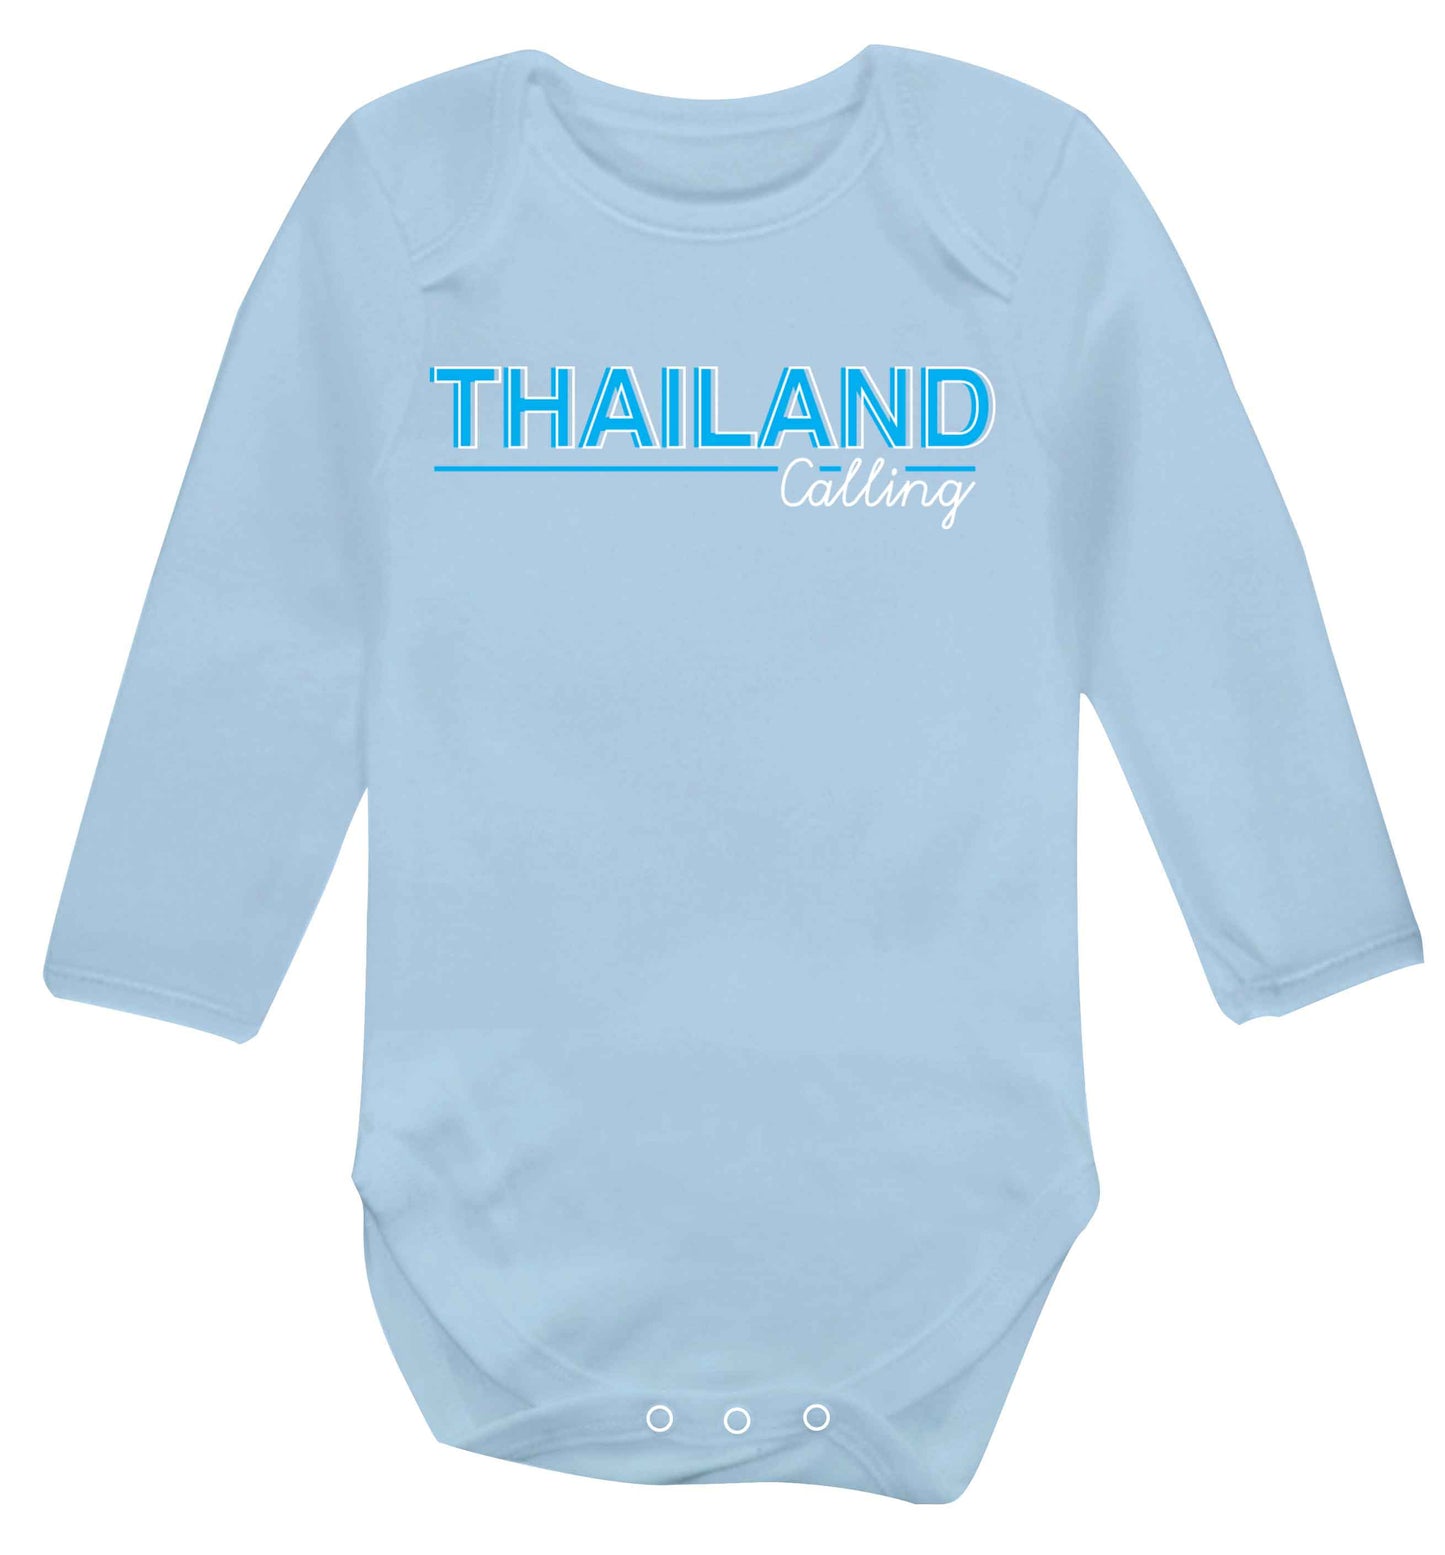 Thailand calling Baby Vest long sleeved pale blue 6-12 months